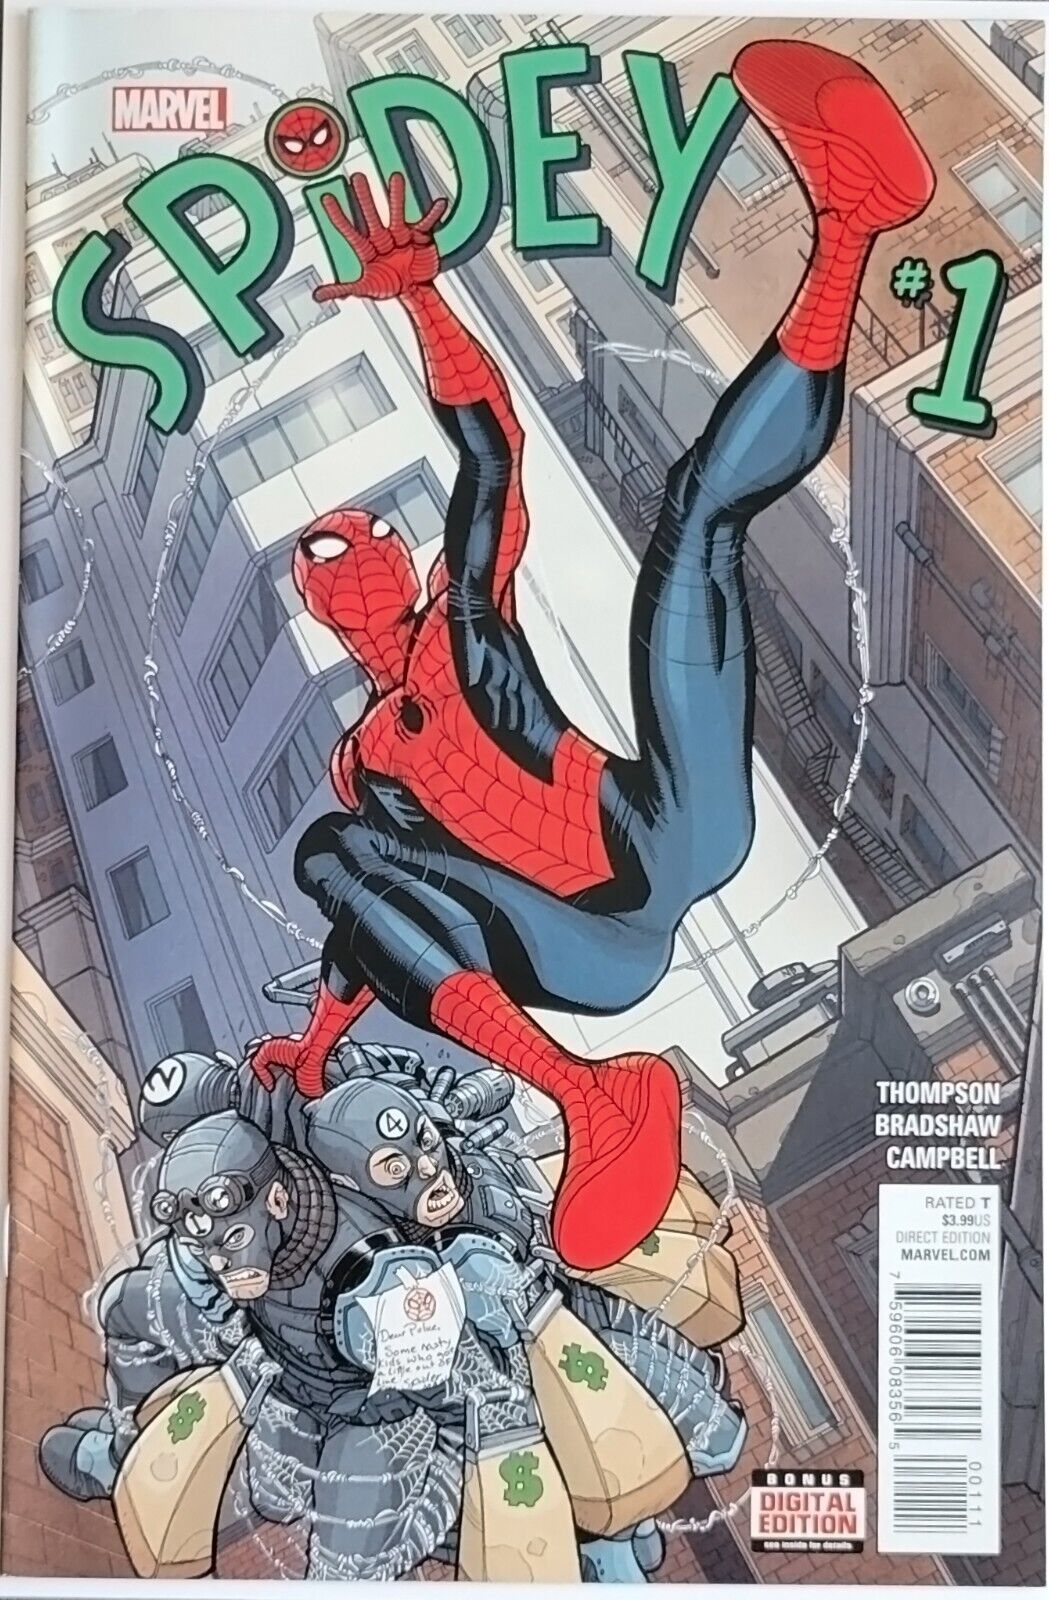 Spidey #1 (2015) Key Debut of 12-Issue Limited Series of Spider-Man's Early Days